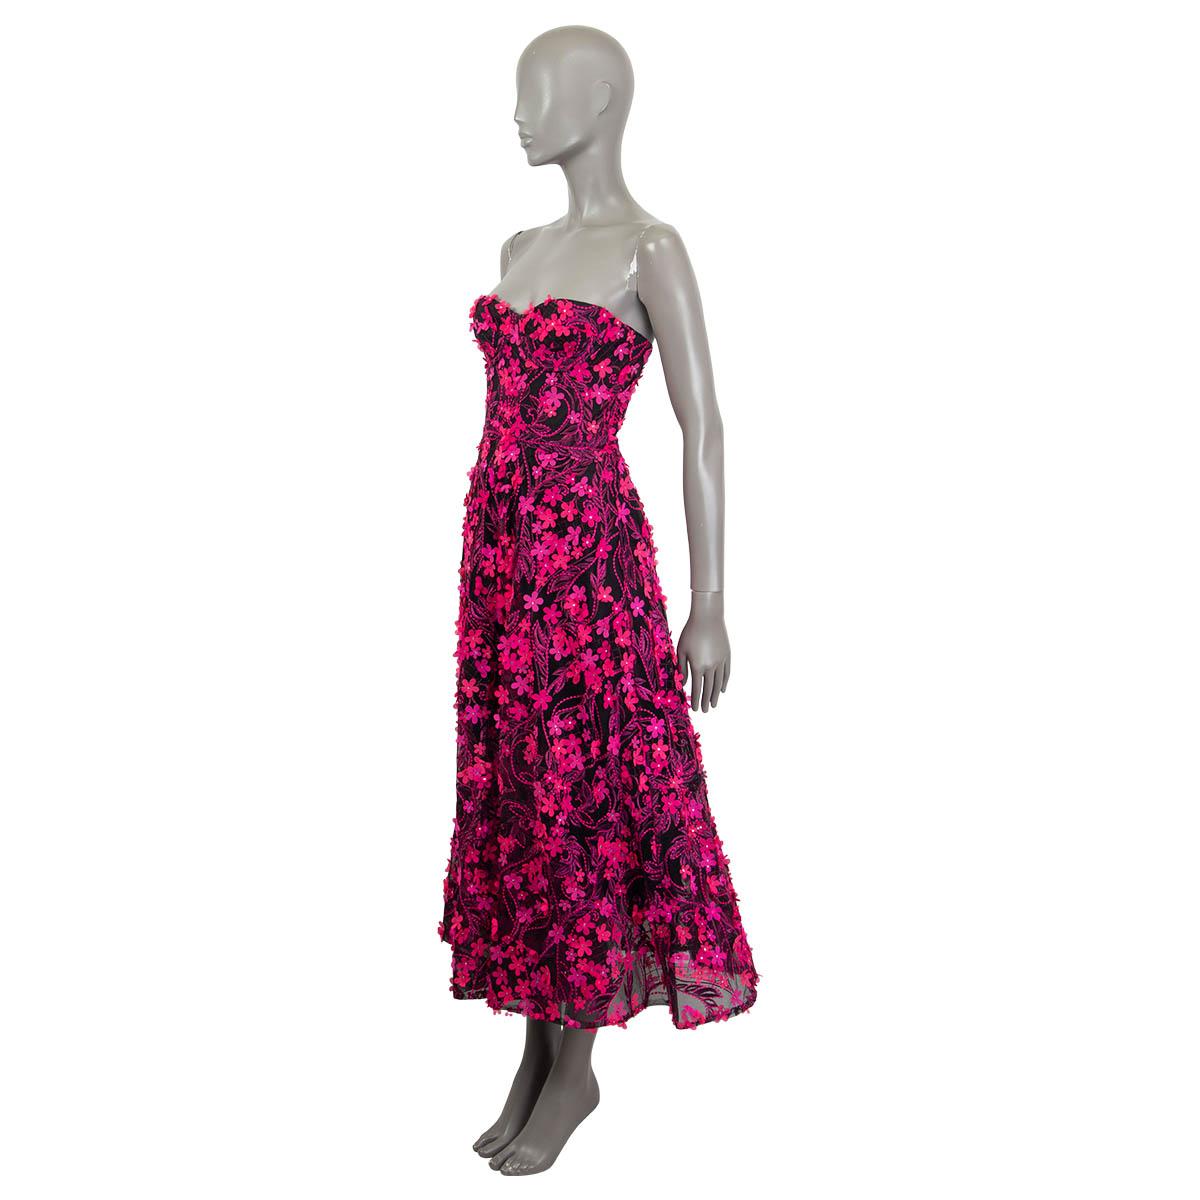 100% authentic Marchesa Notte floral corsage midi dress in pink and black nylon (100%). Opens with a concealed zipper and a hook at the back. Lined in black polyester (100%). Brand new, with tags.

Measurements
Tag Size	0
Size	XS
Bust	76cm (29.6in)